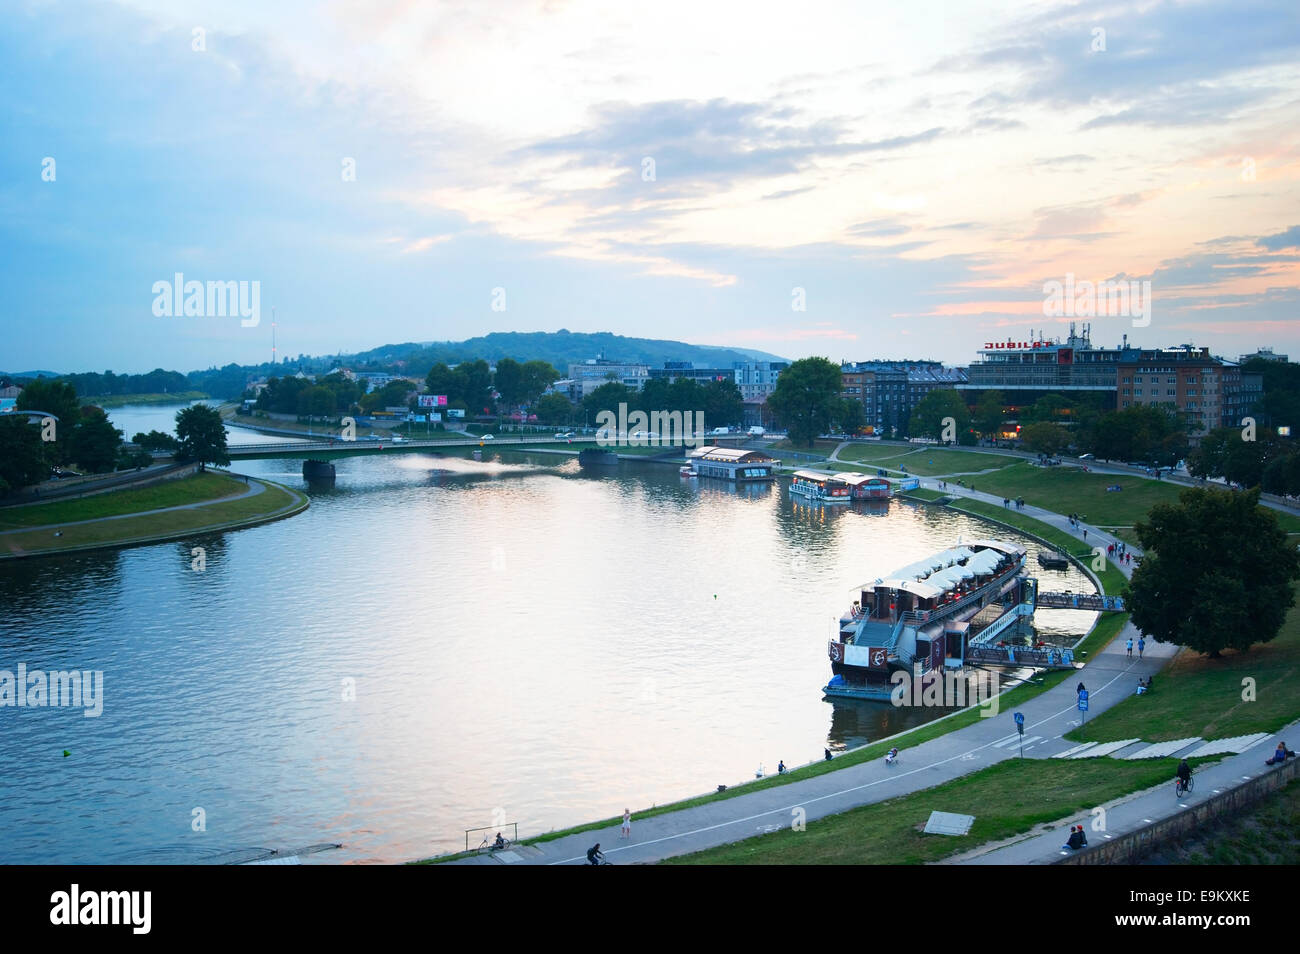 People walking and cycling on the embankment of Vistula river at dusk in Krakow. Stock Photo